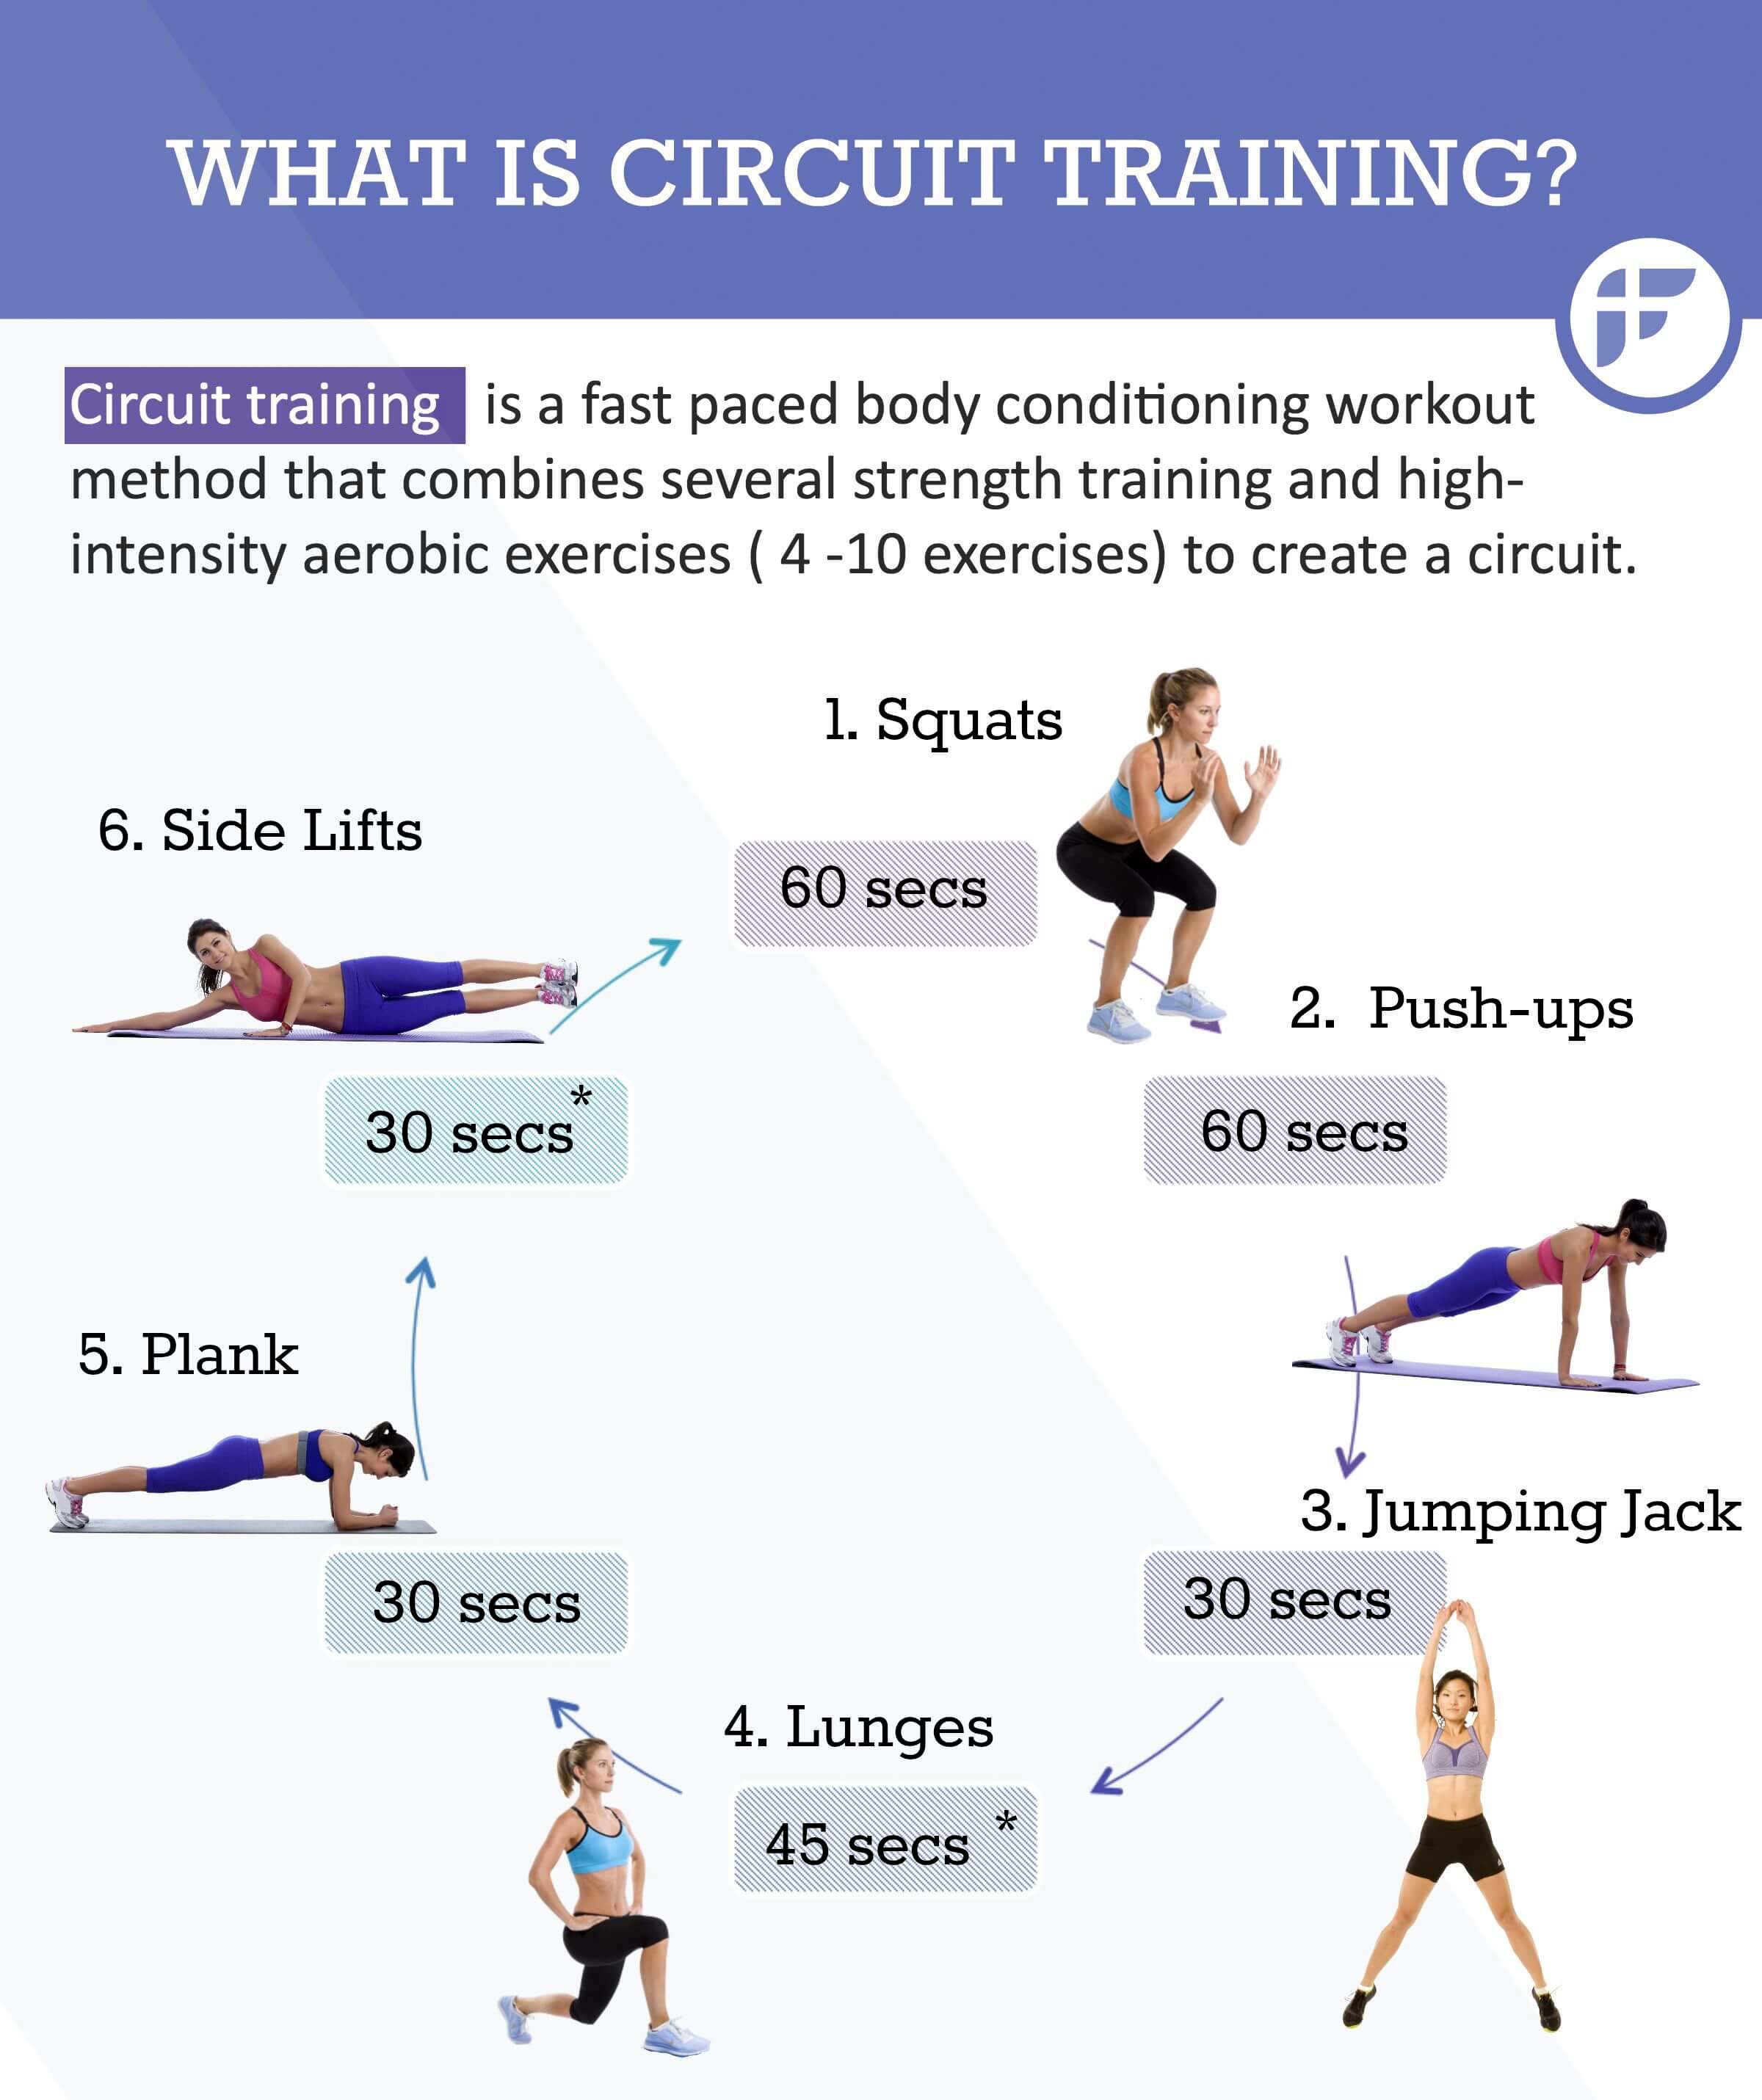 cardio and muscular endurance exercises